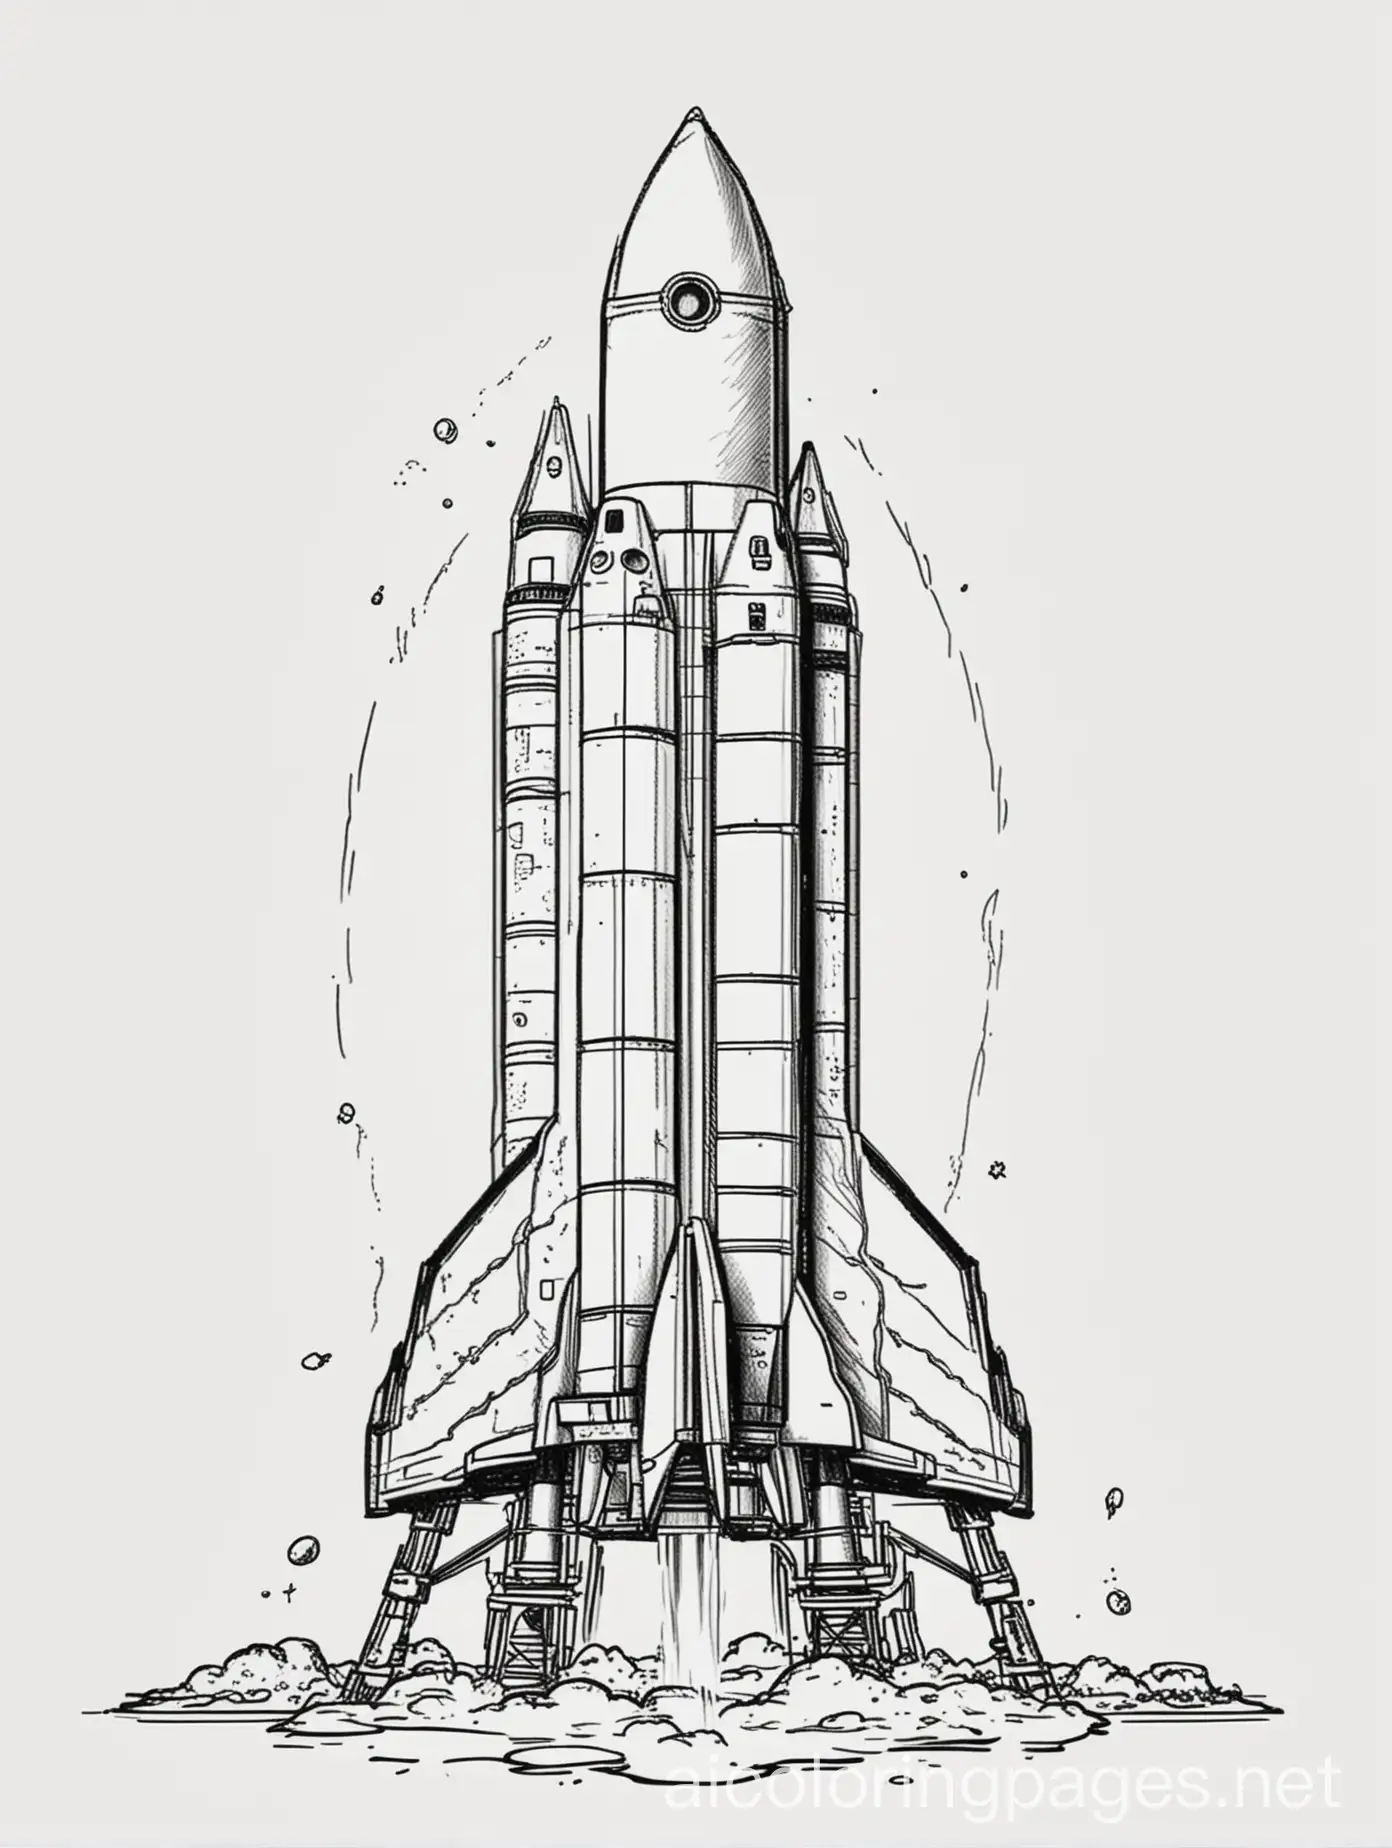 A rocket launch pad ready for lift-off, coloring page, black and white, line art, white background, Simplicity, Ample White Space. The background of the coloring page is plain white to make it easier for children to color within the lines. The outlines of all the subjects are easy to distinguish, making it simple for kids to color without too much difficulty